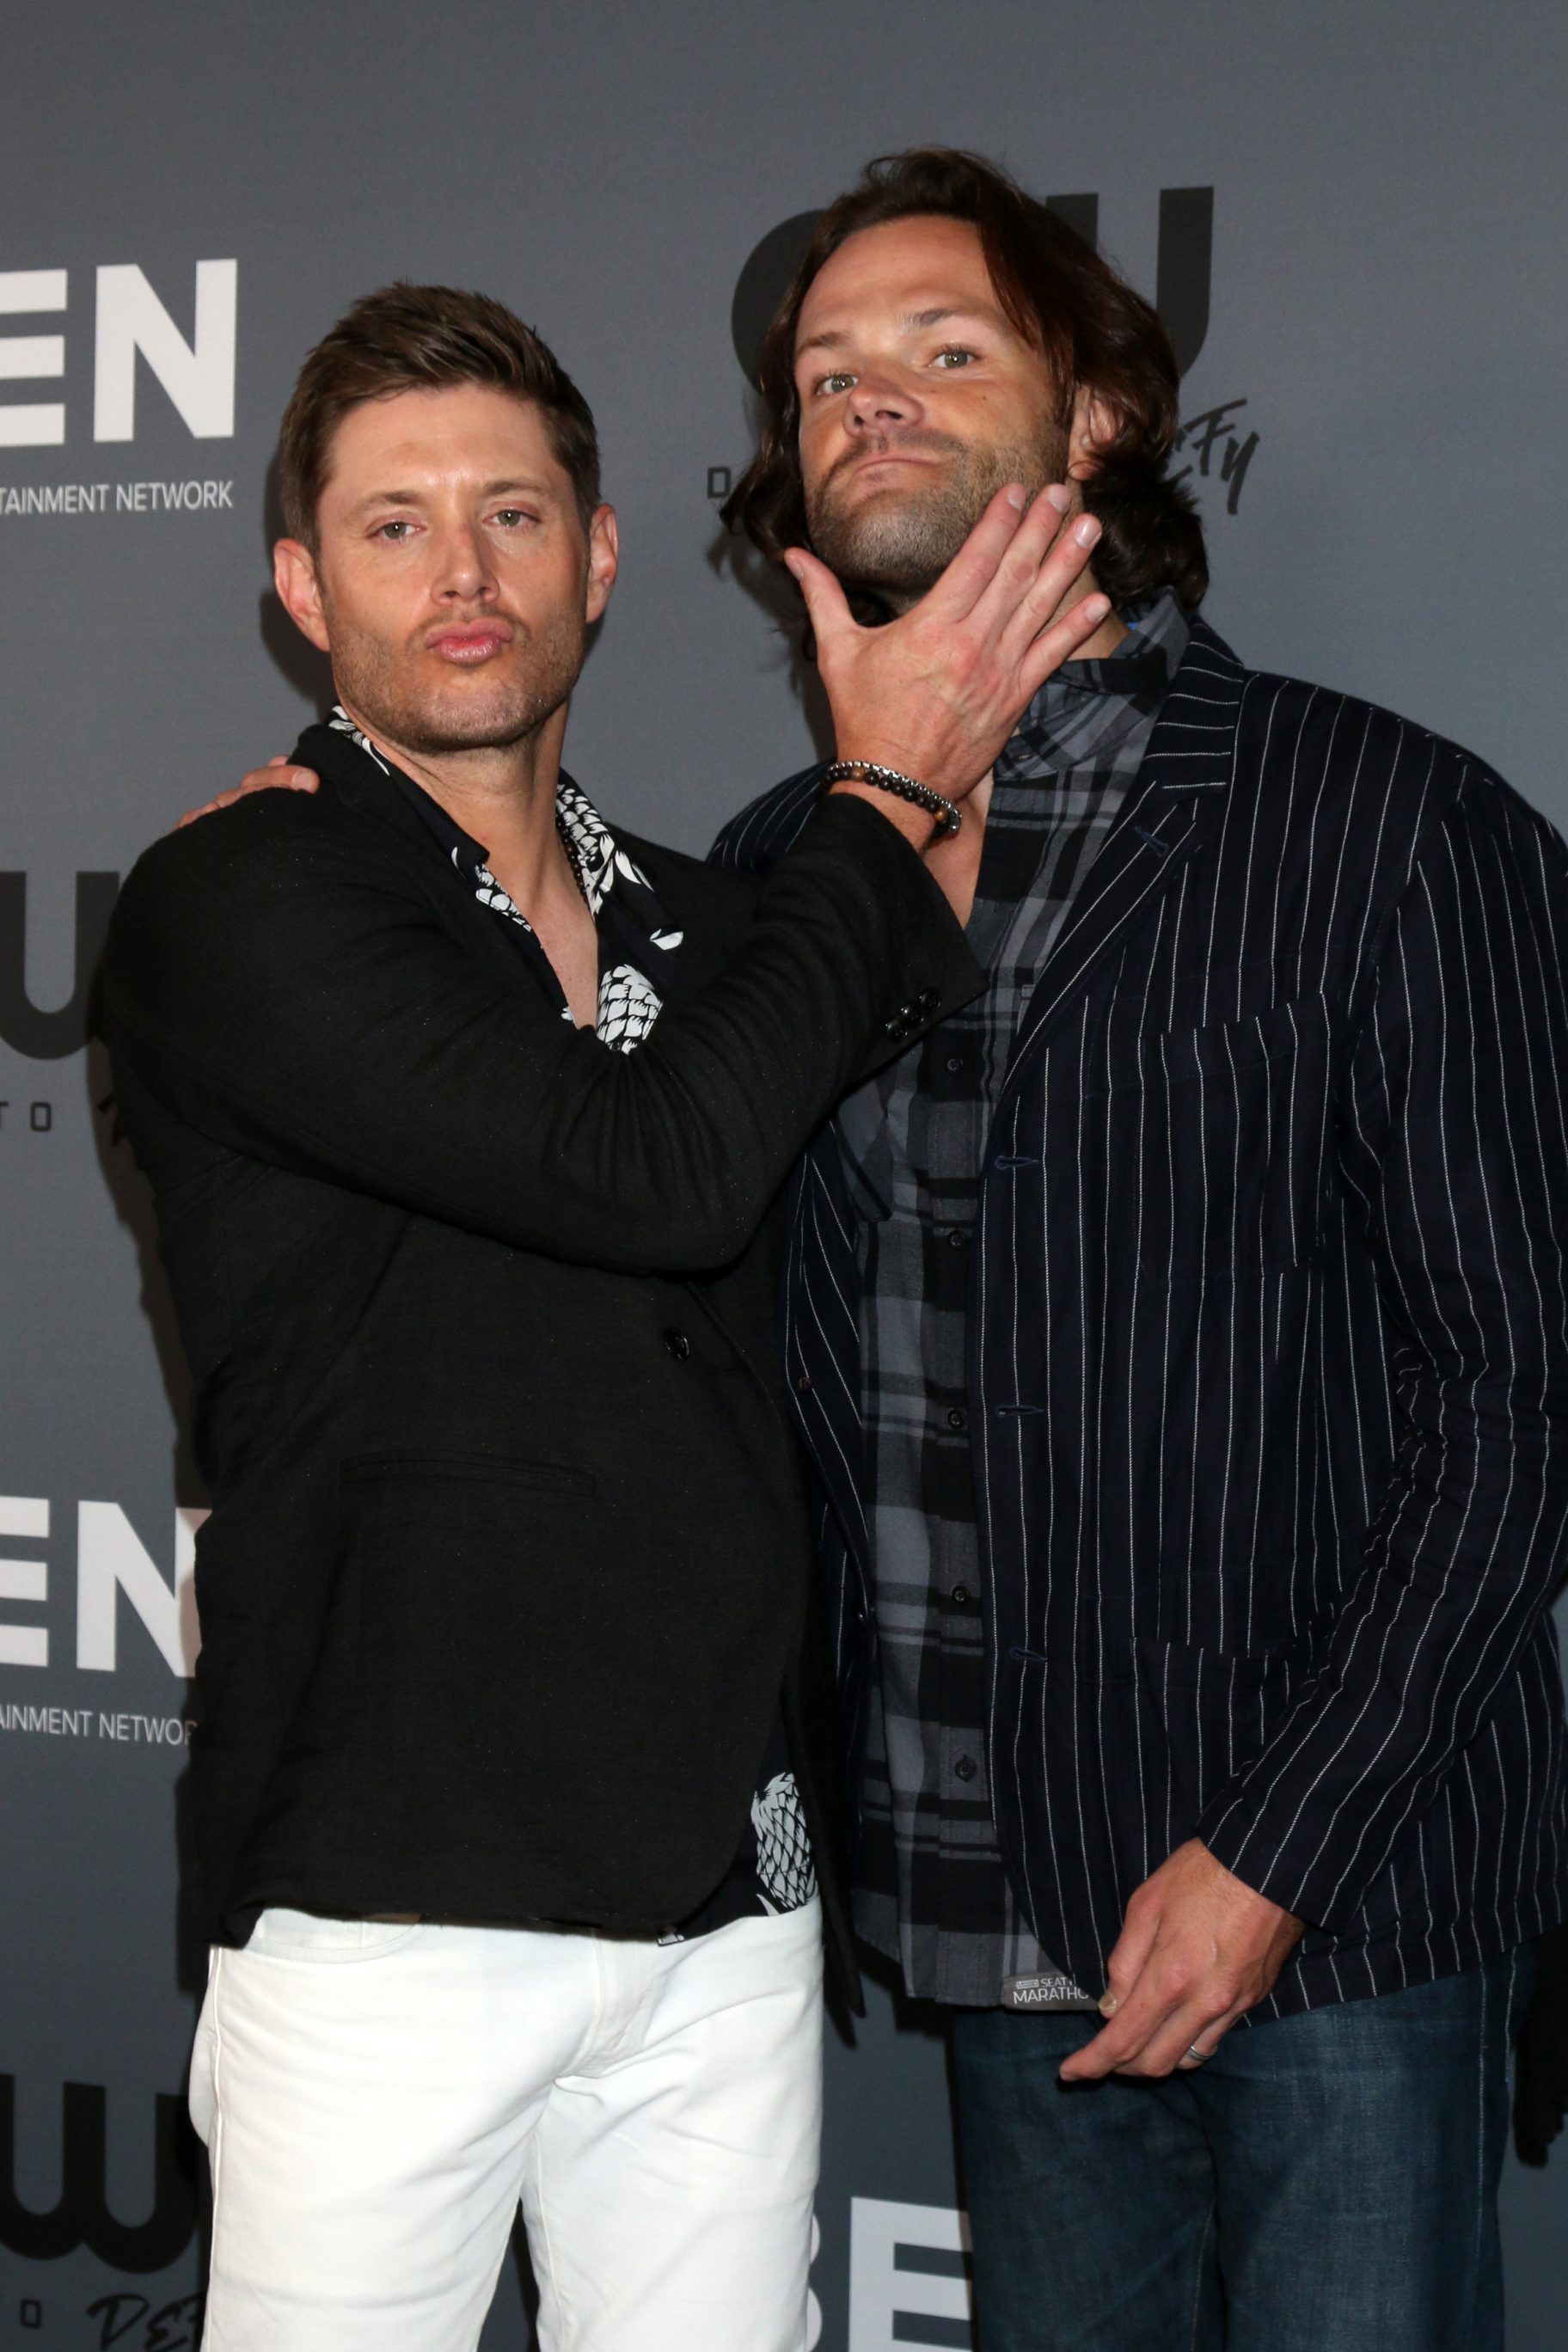 How Tall is Jensen Ackles Exactly